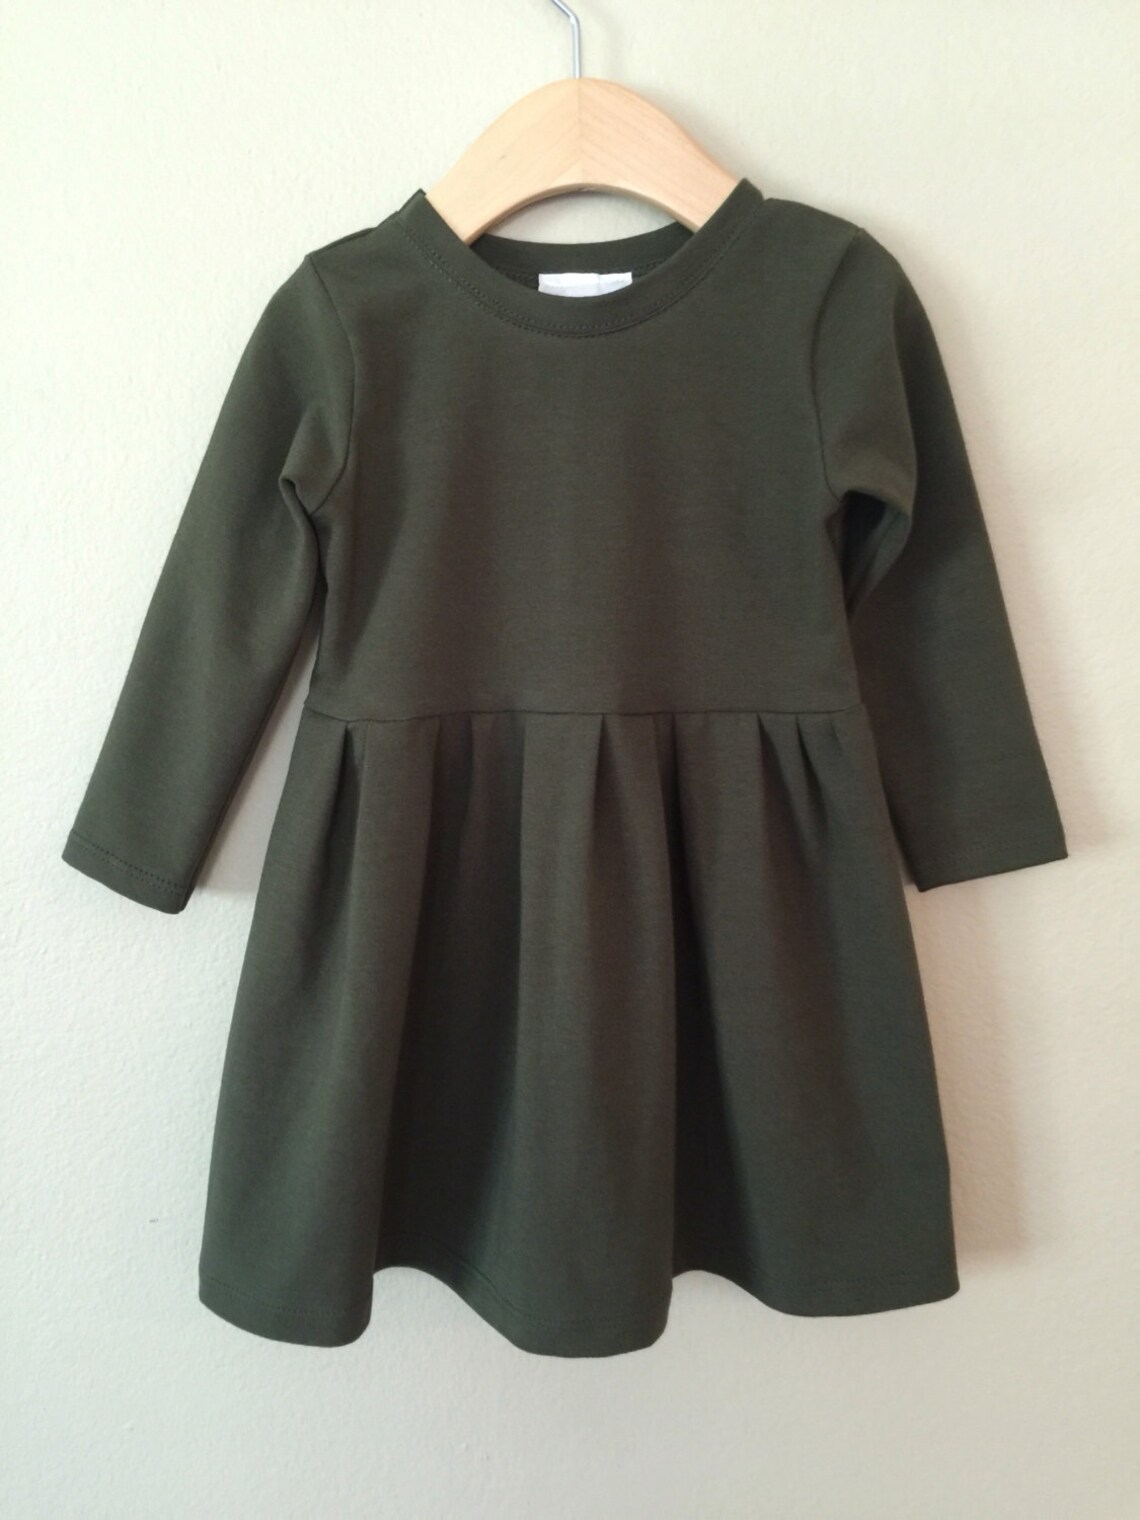 Baby Toddler Girl Dress Long Sleeve Made to Order olive - Etsy